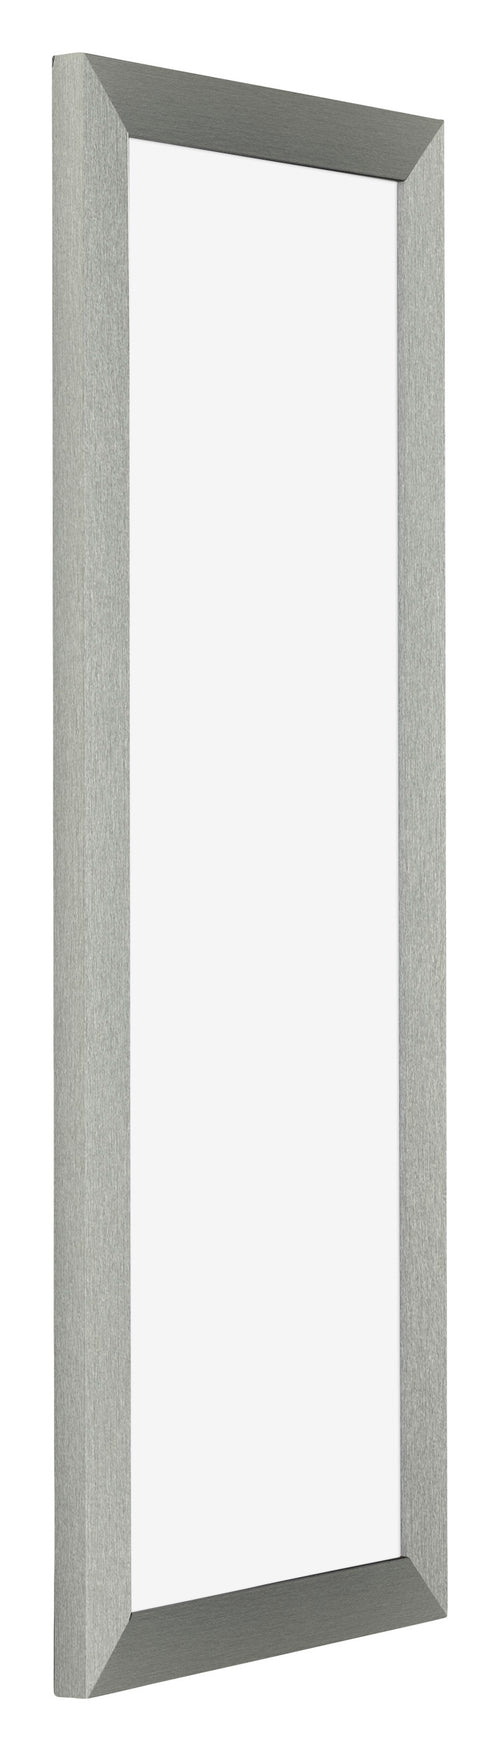 Mura MDF Photo Frame 20x60 Champagne Front Oblique | Yourdecoration.co.uk